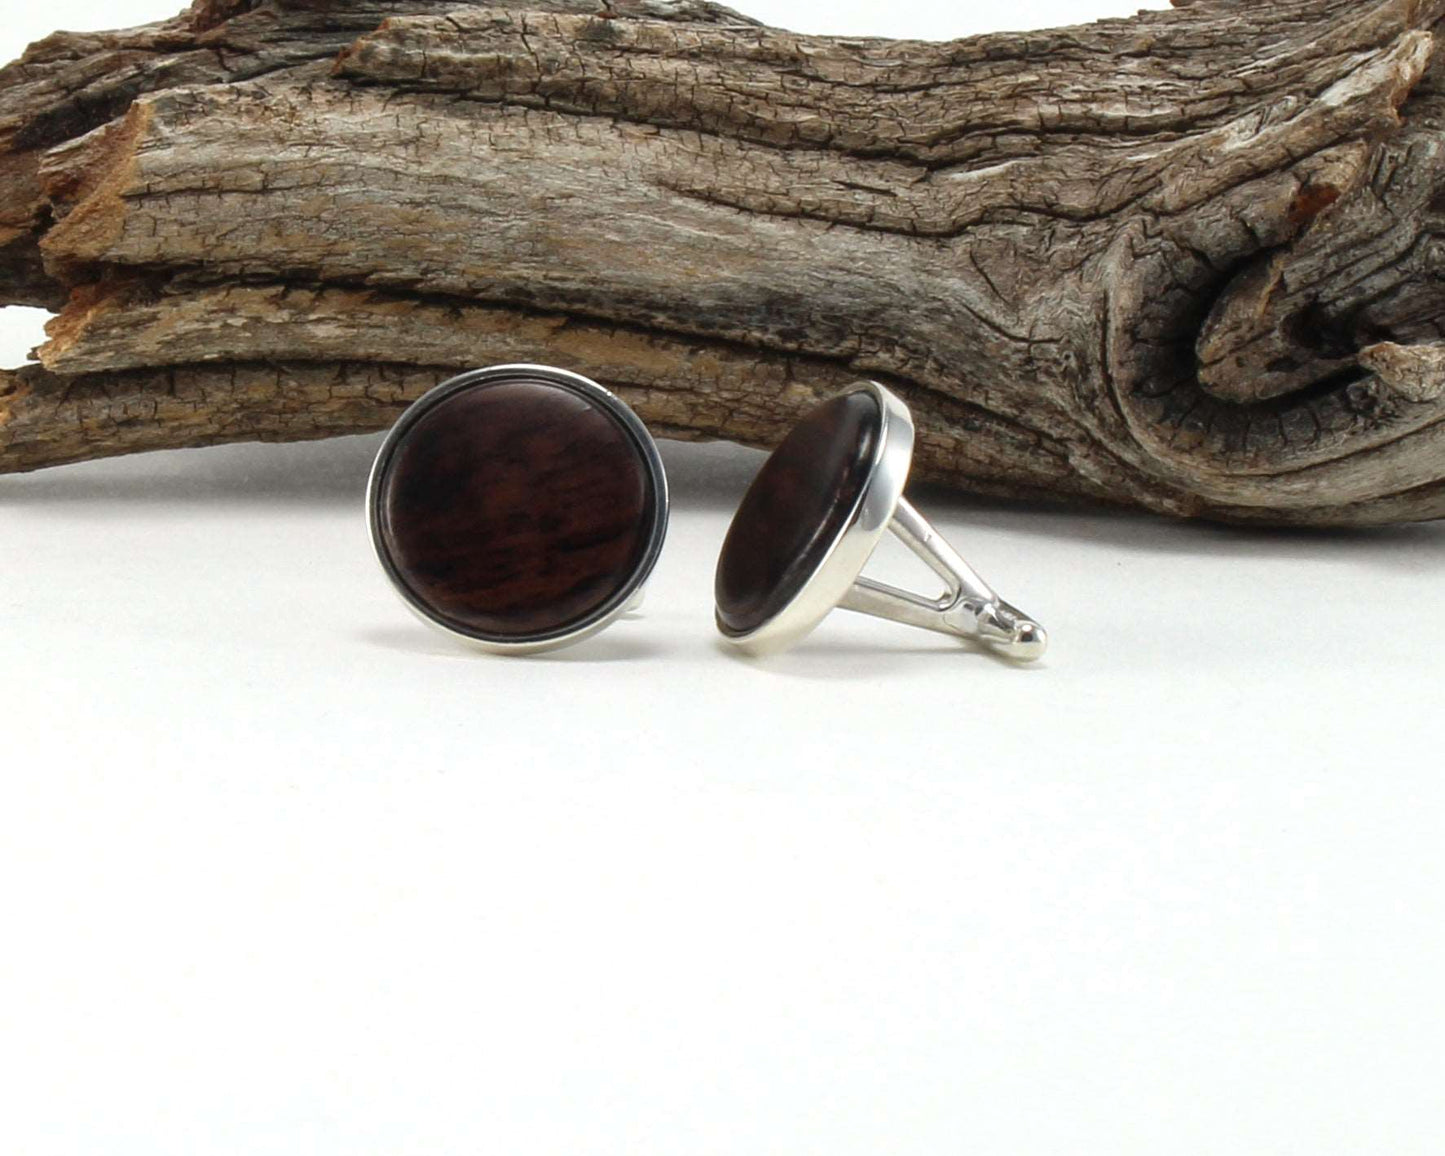 925 Sterling Silver Cuff Links with East Indian Rose Wood Inlay